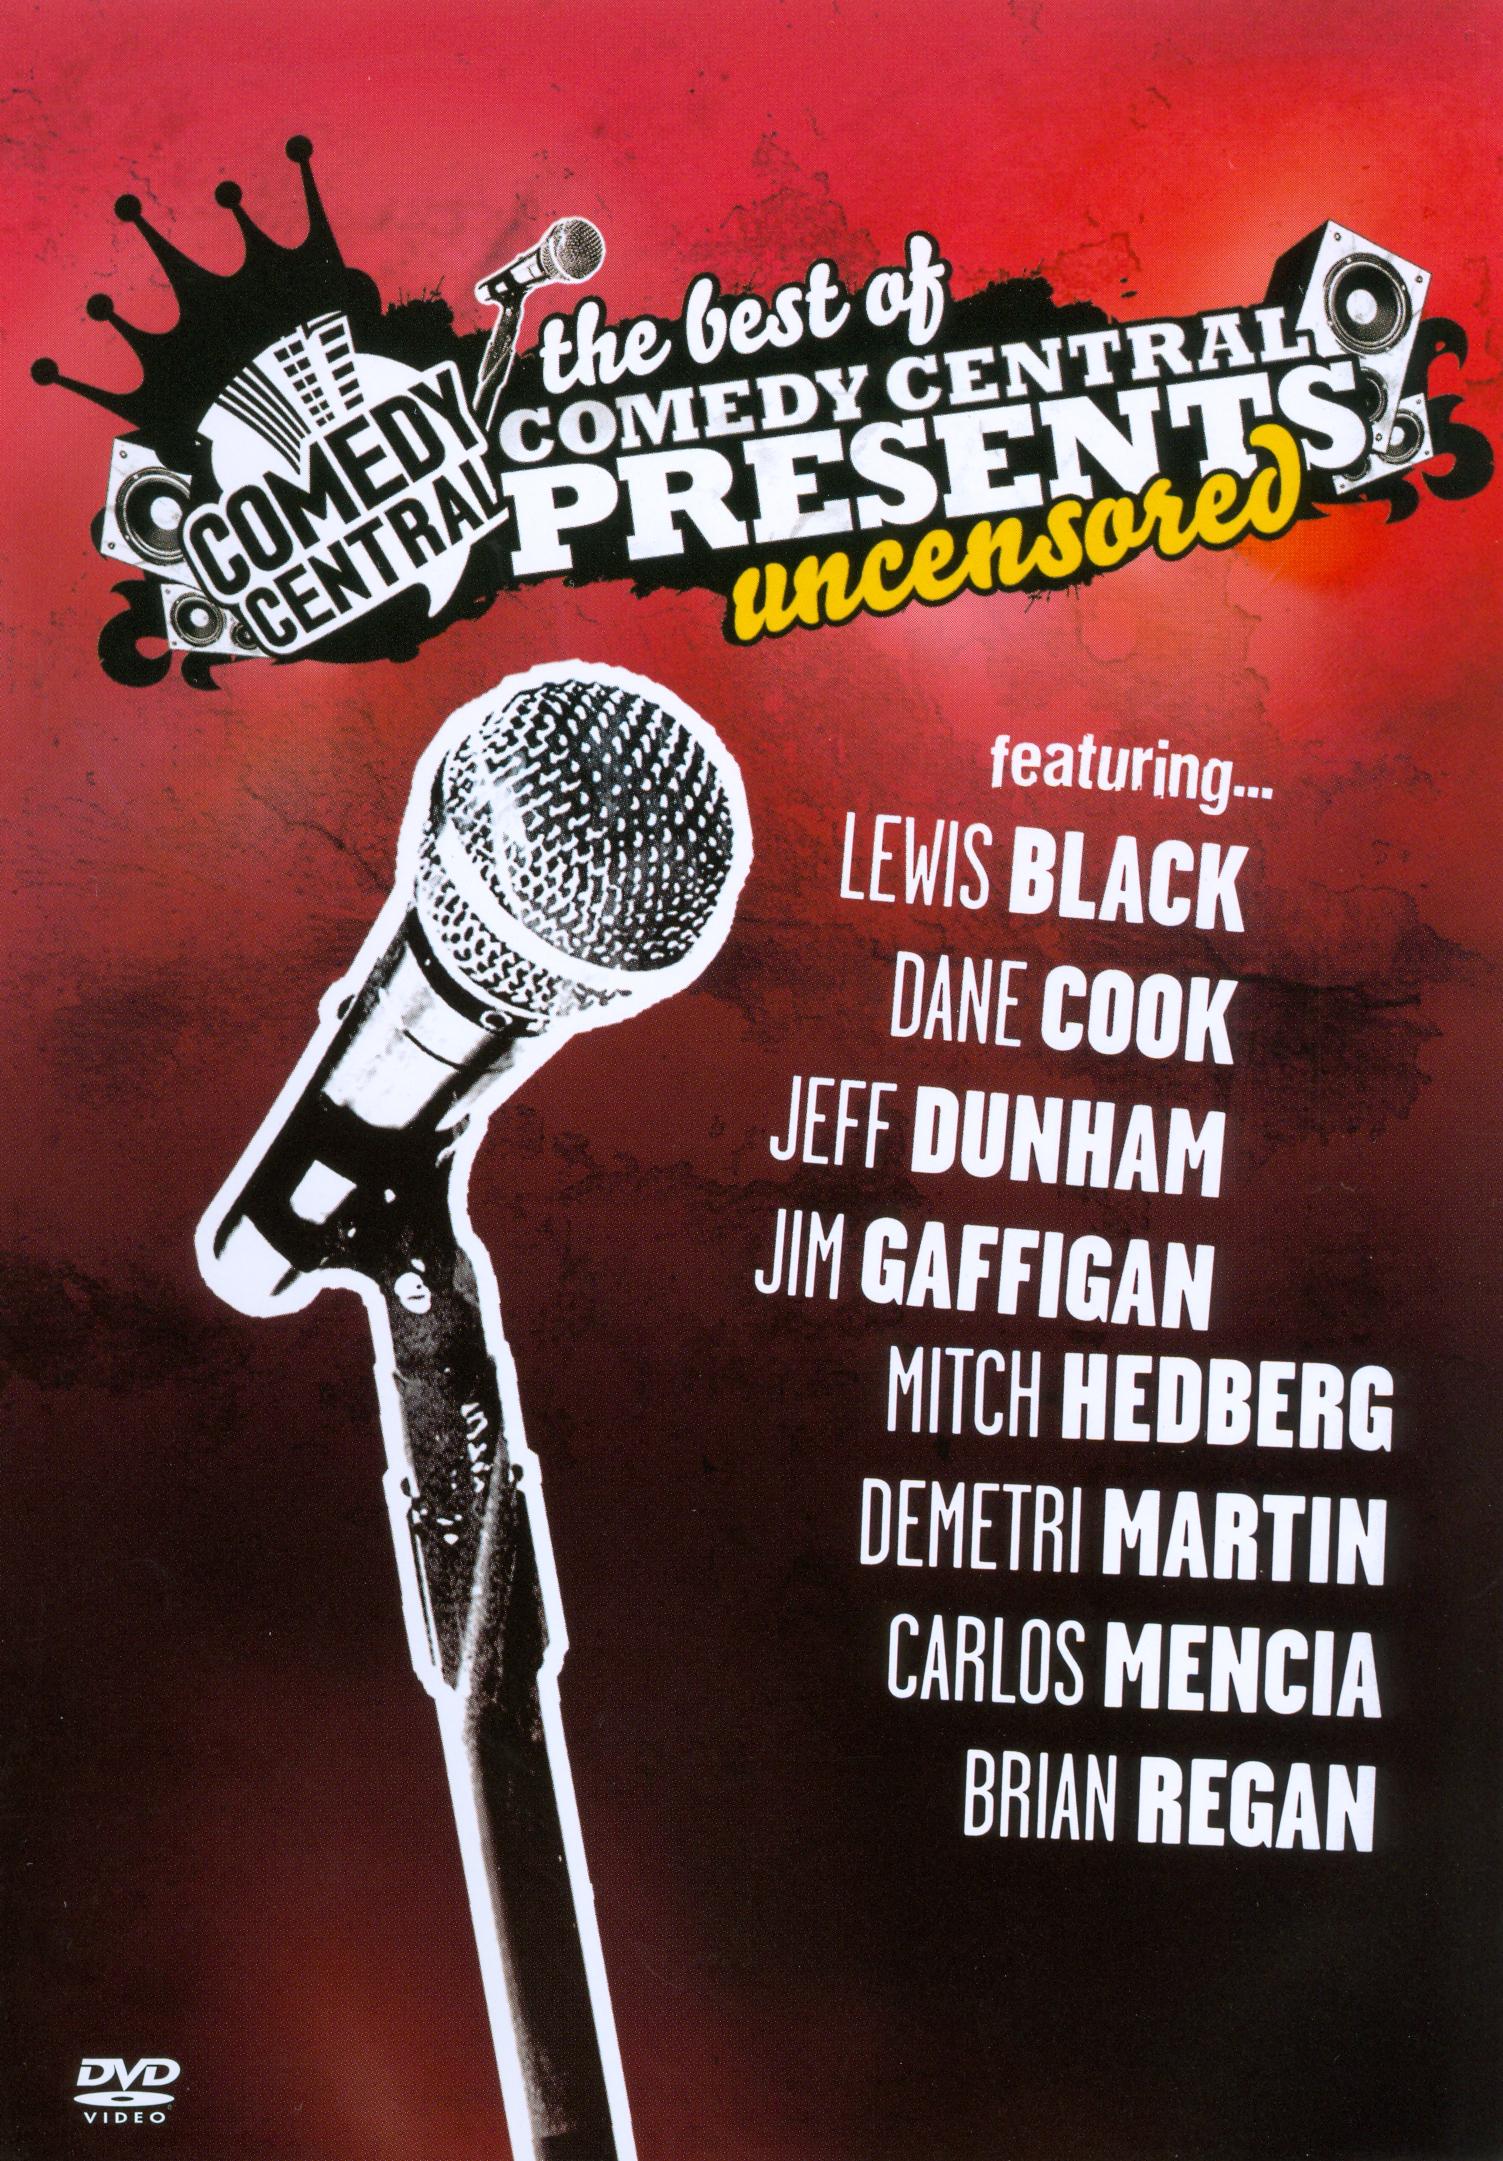 The Best Of Comedy Central Presents Dvd 2008 Best Buy 